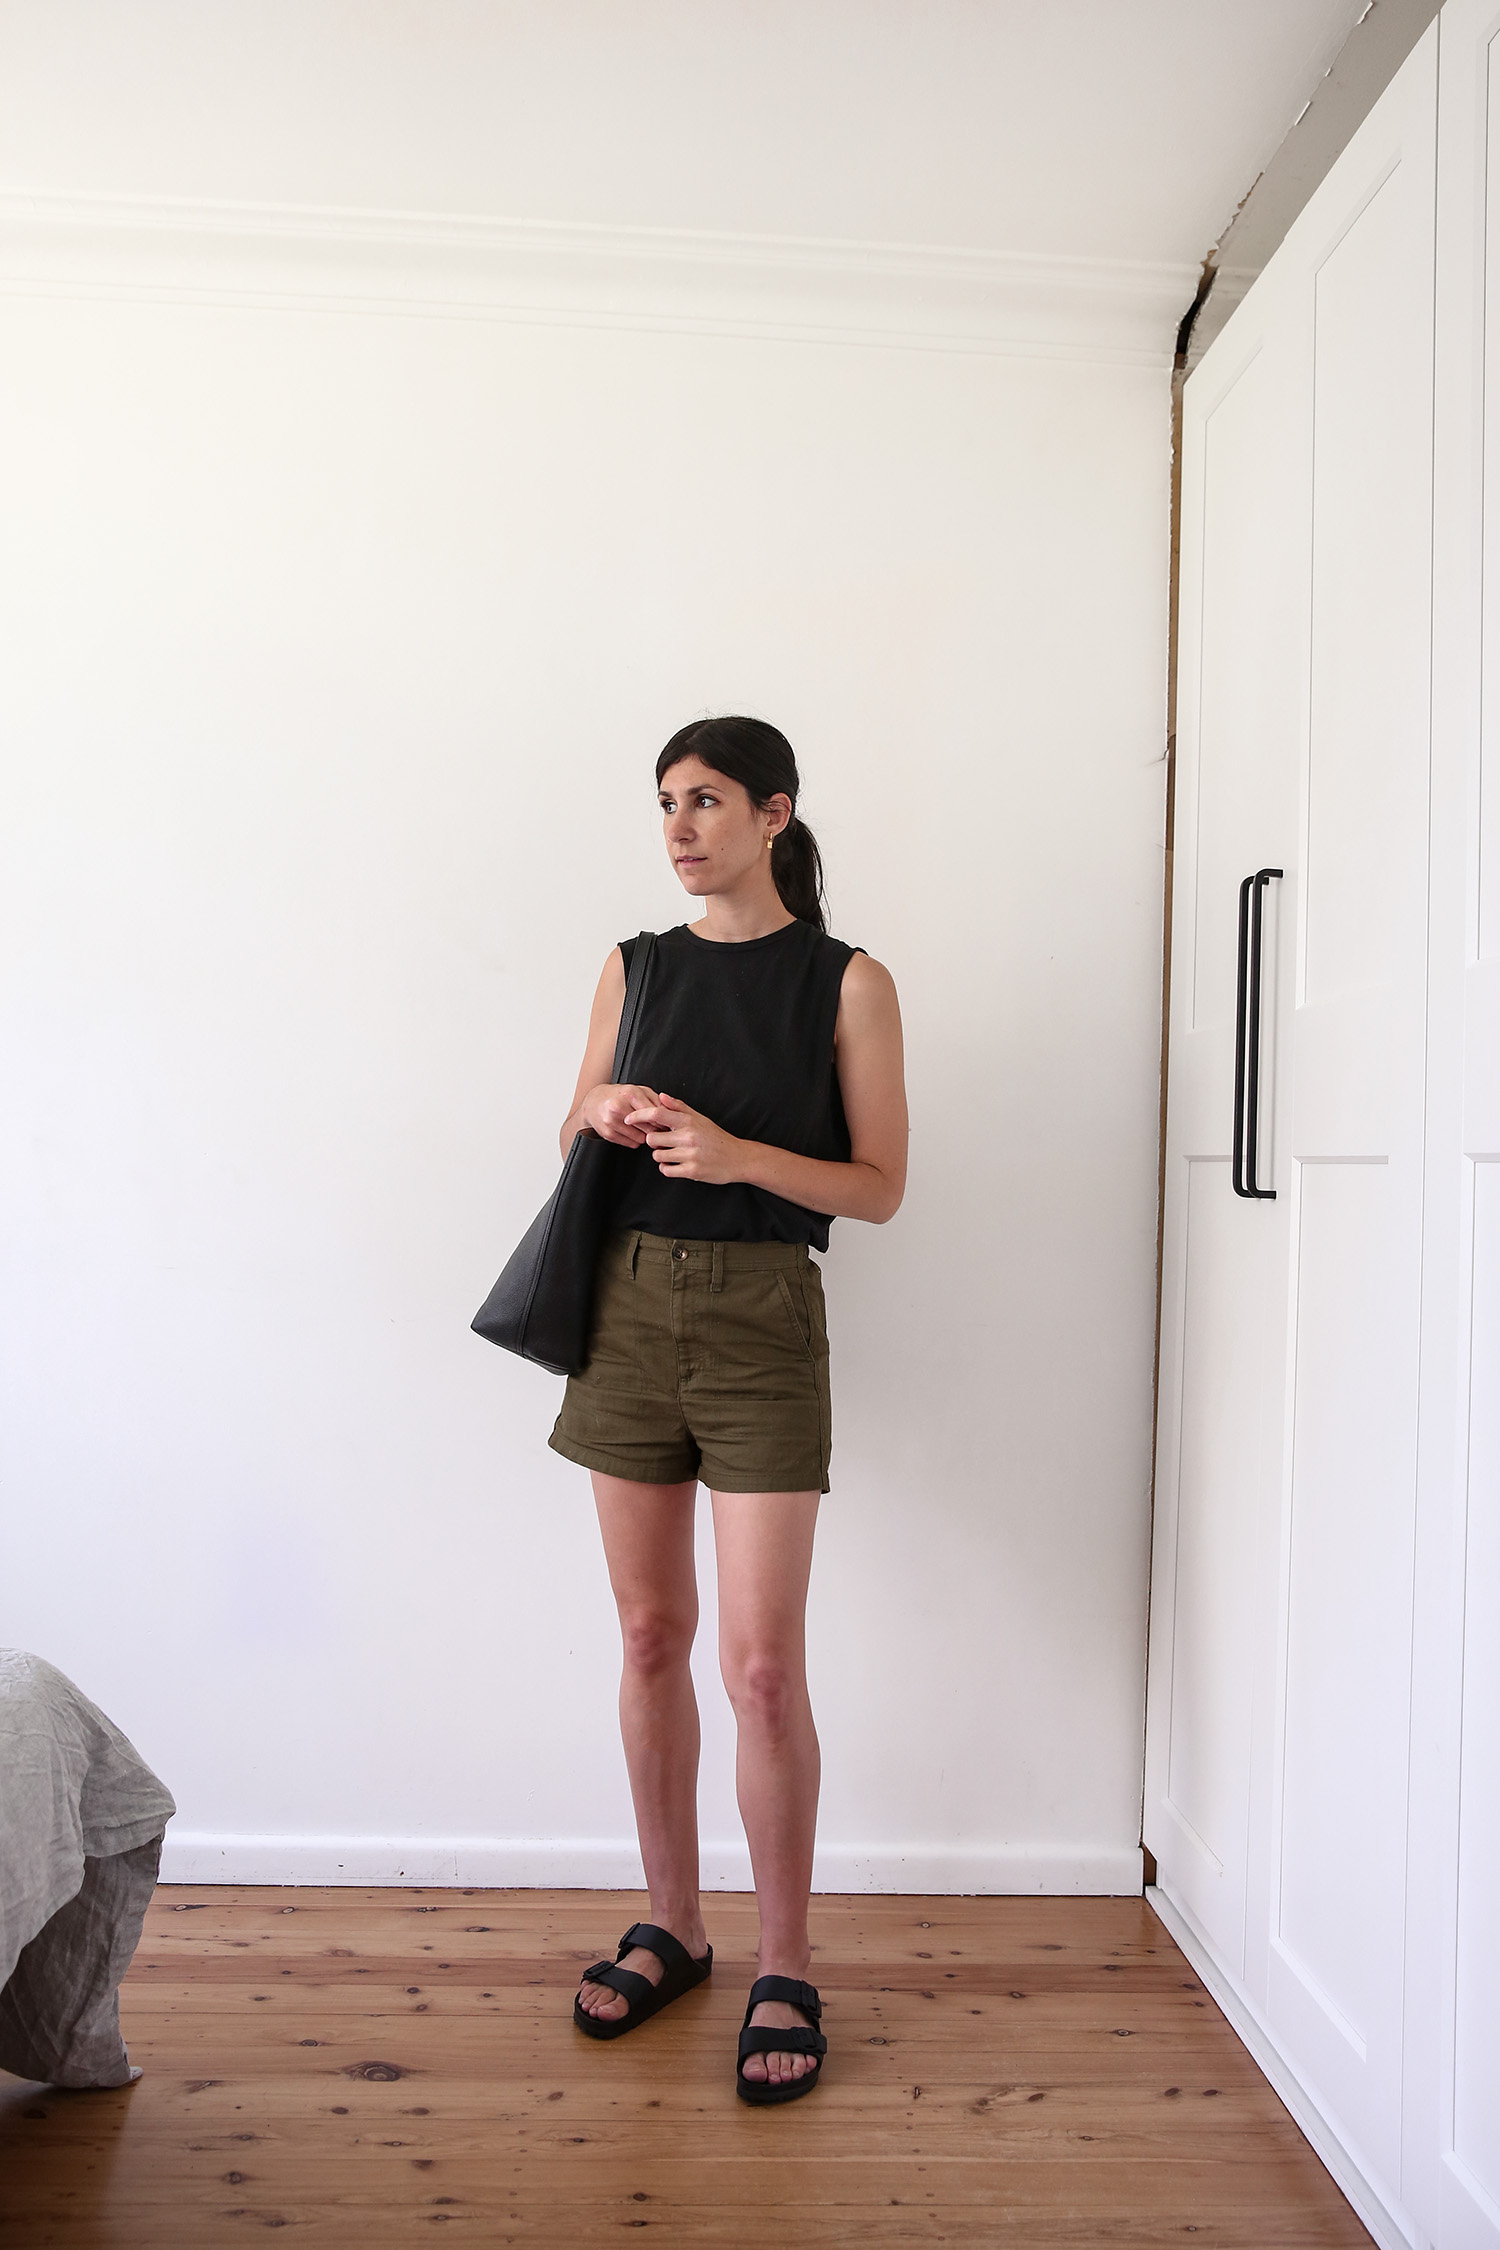 Madewell Camp shorts and Birkenstock sandals